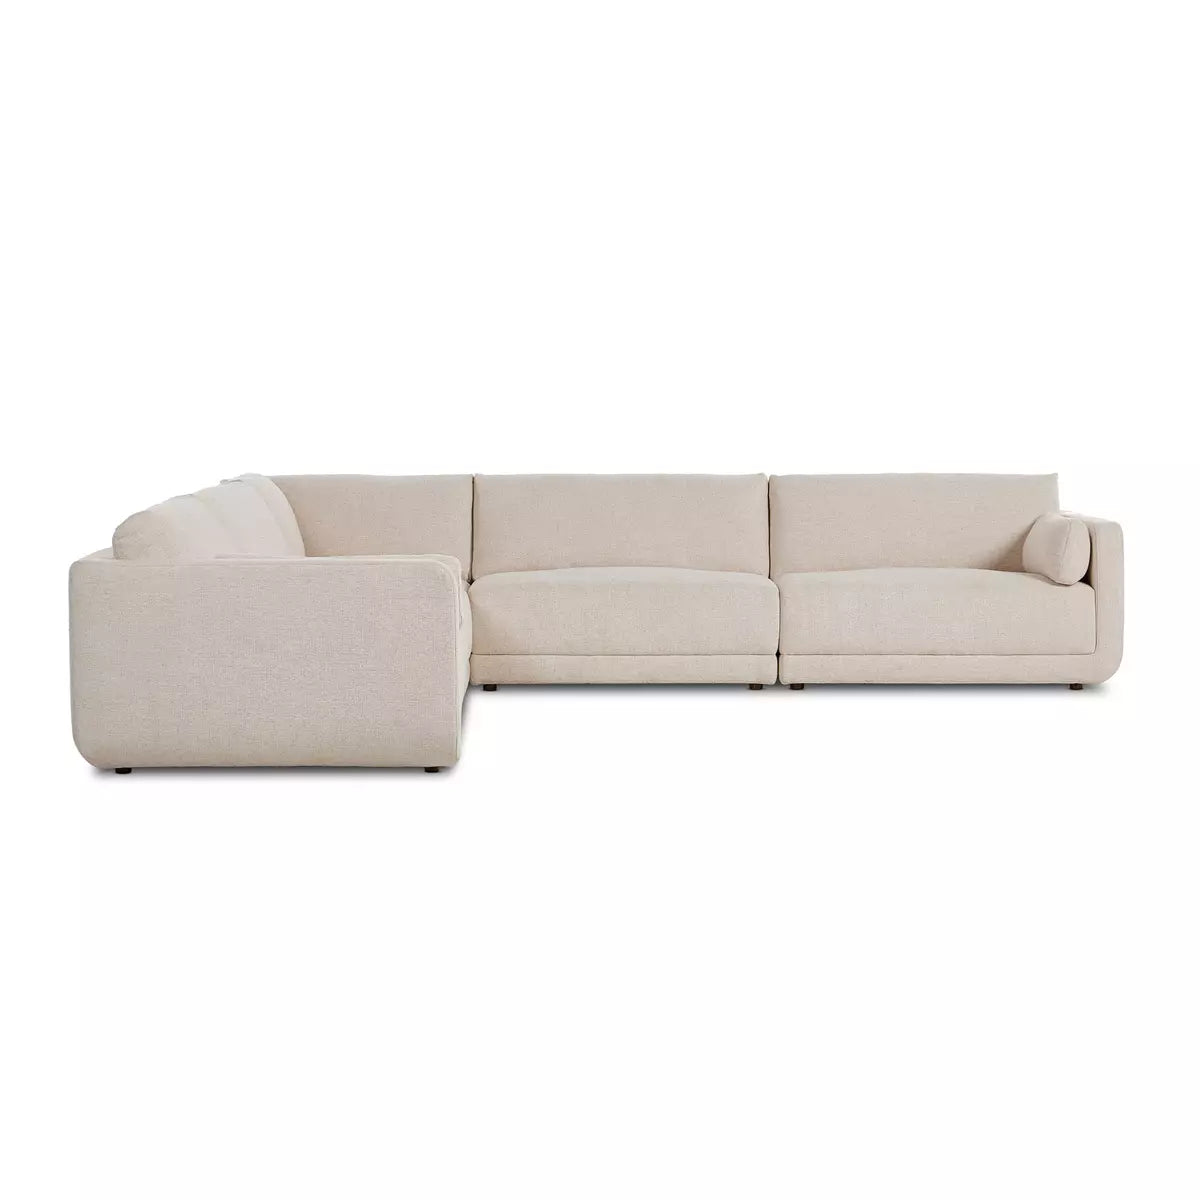 Toland 5 - Piece Sectional